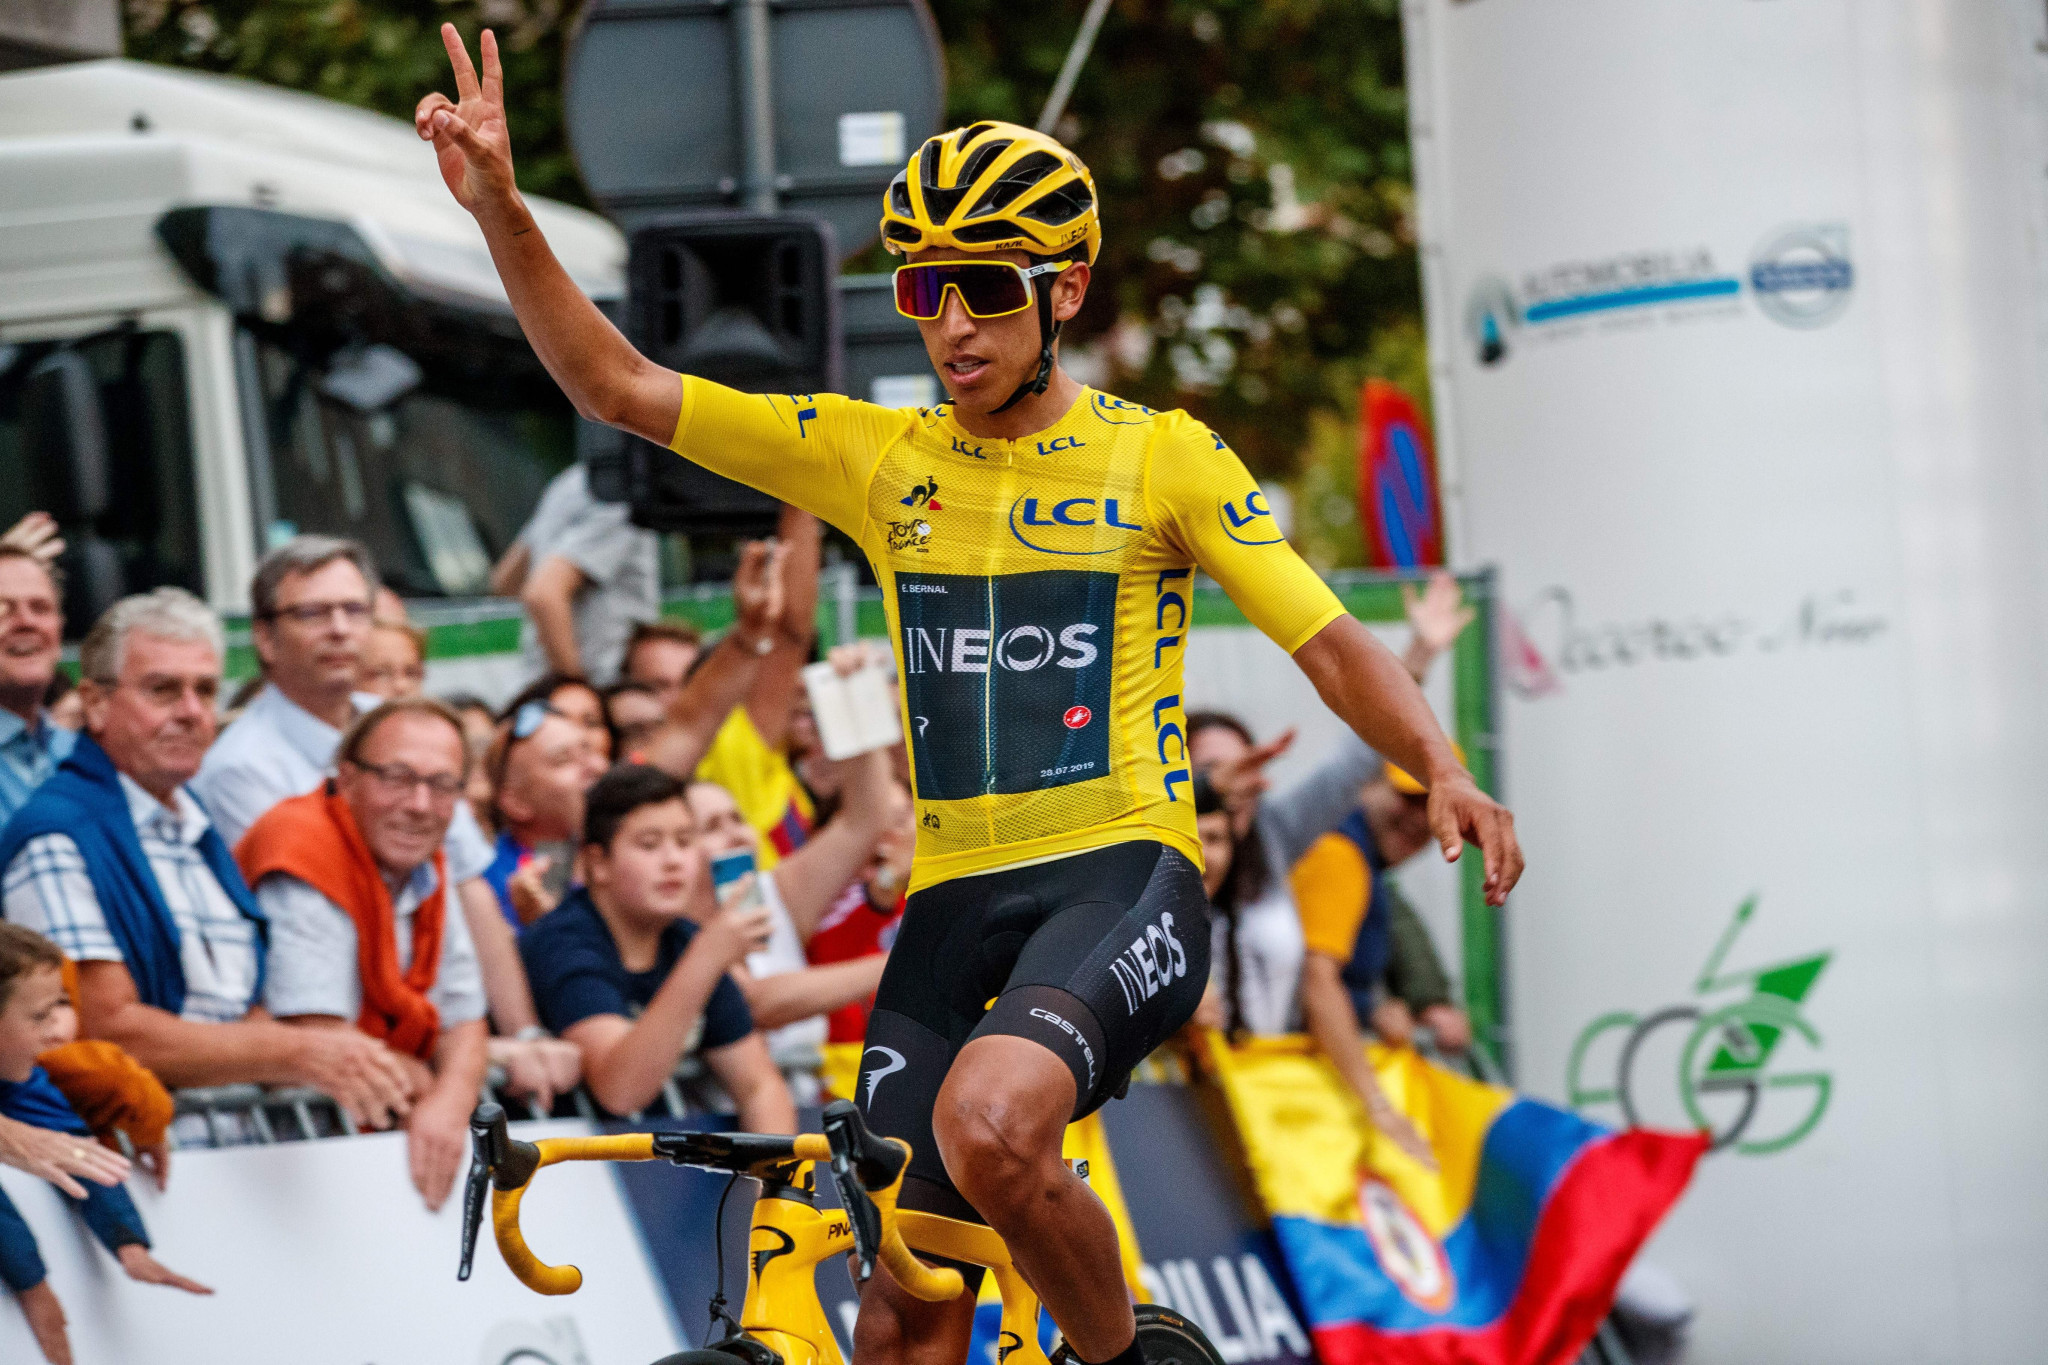 Tour de France champion Egan Bernal will be among the field when the 2019 UCI World Tour continues tomorrow with the Clásica de San Sebastián in Spain ©Getty Images